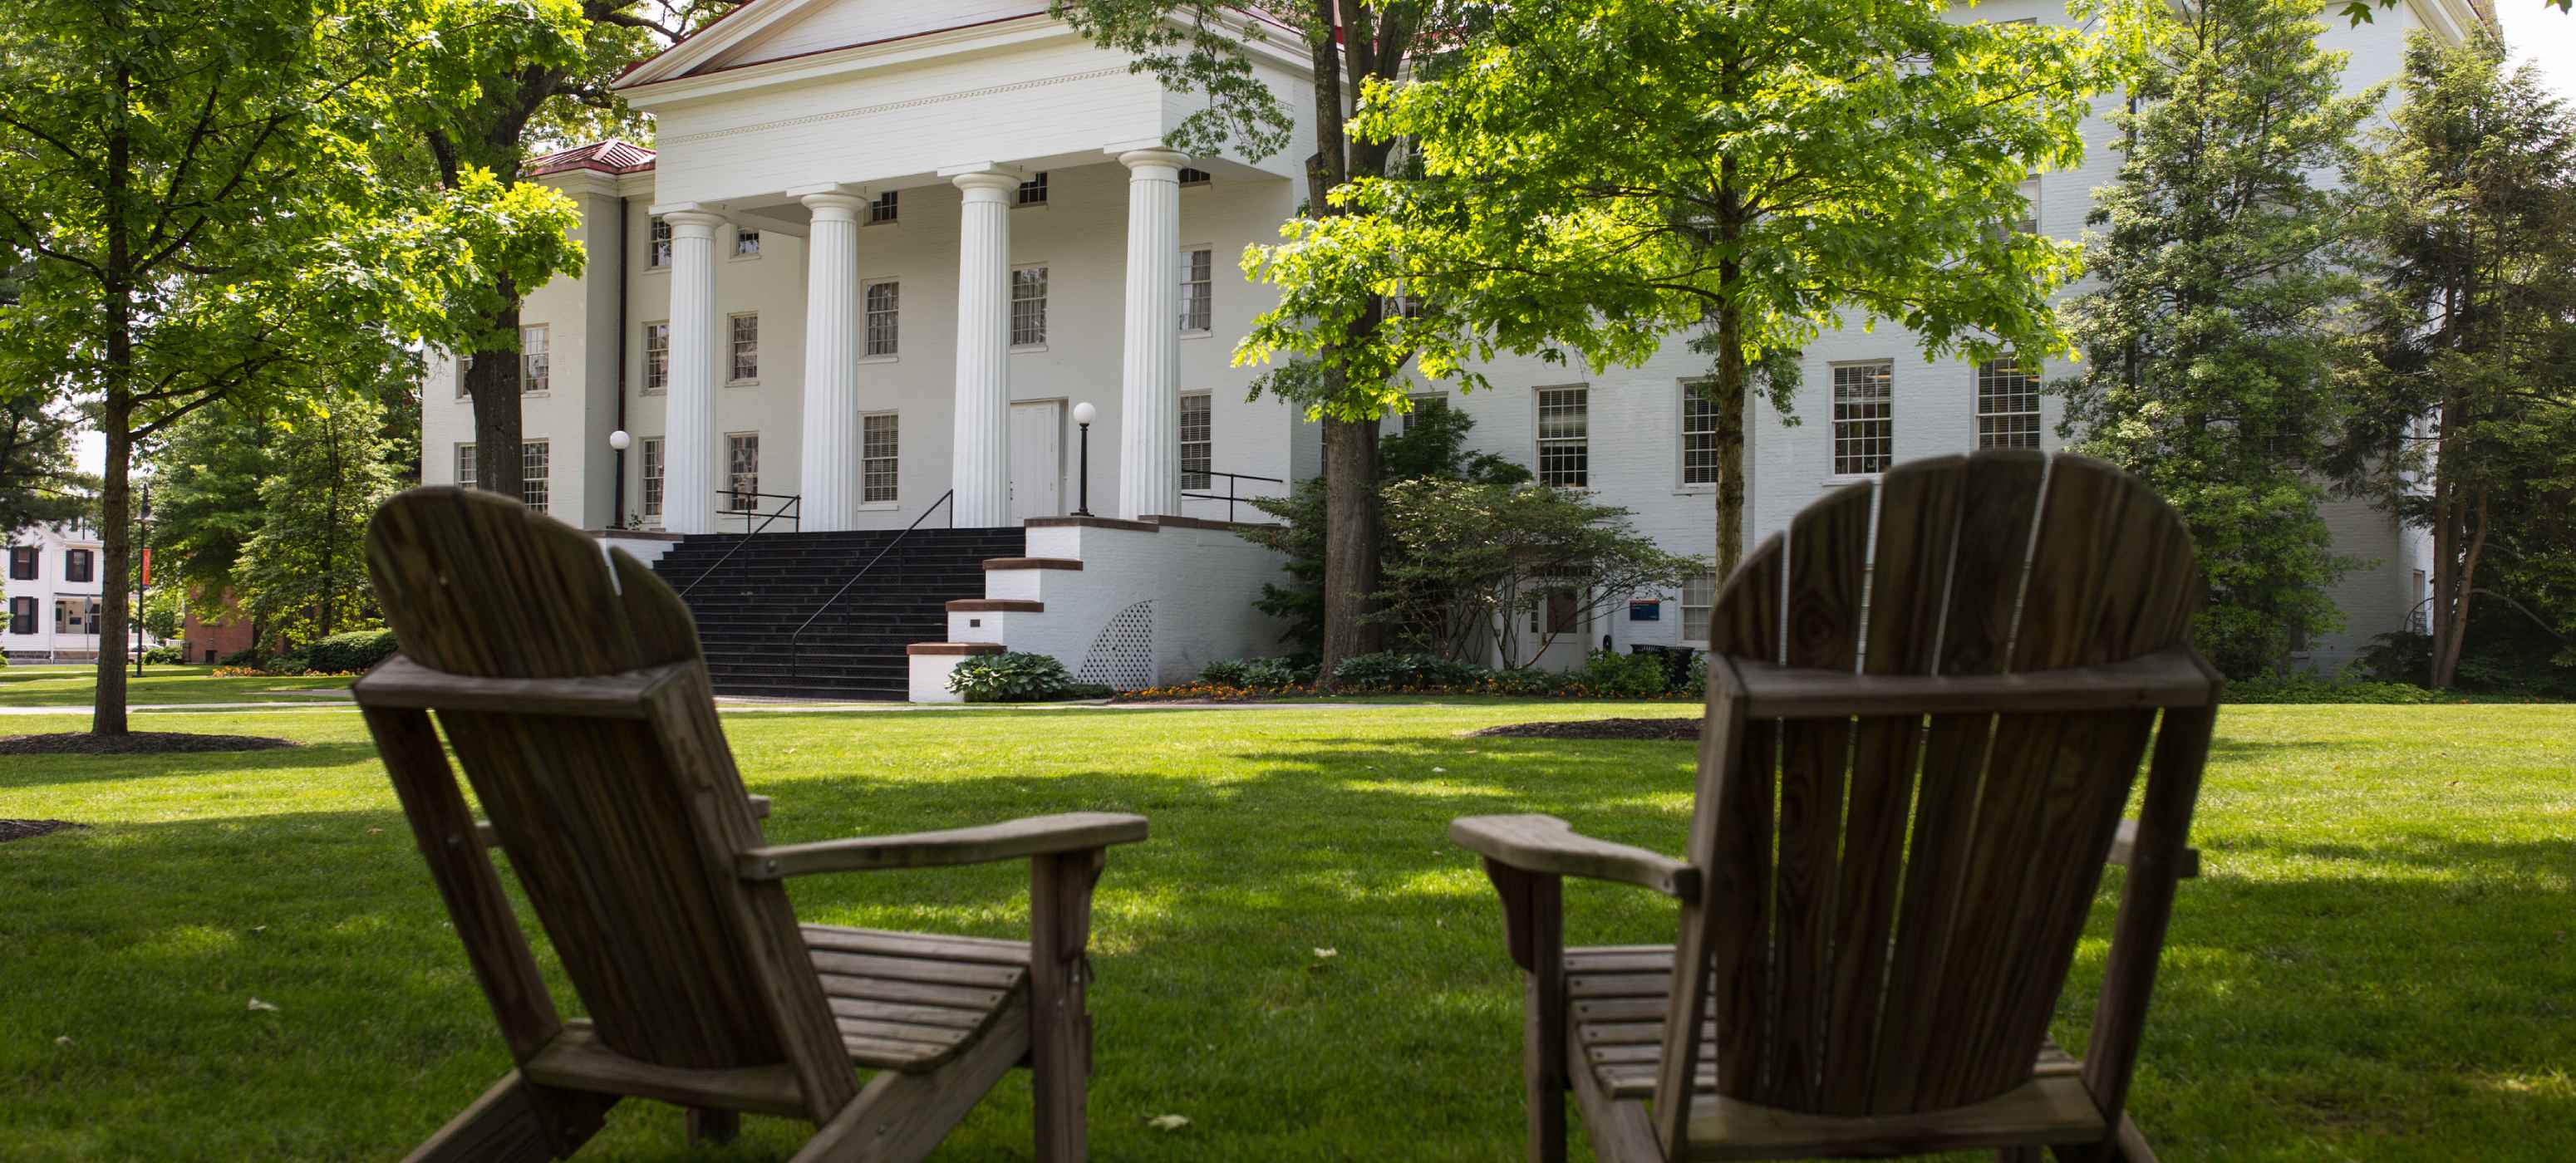 Gettysburg College campus with empty chairs